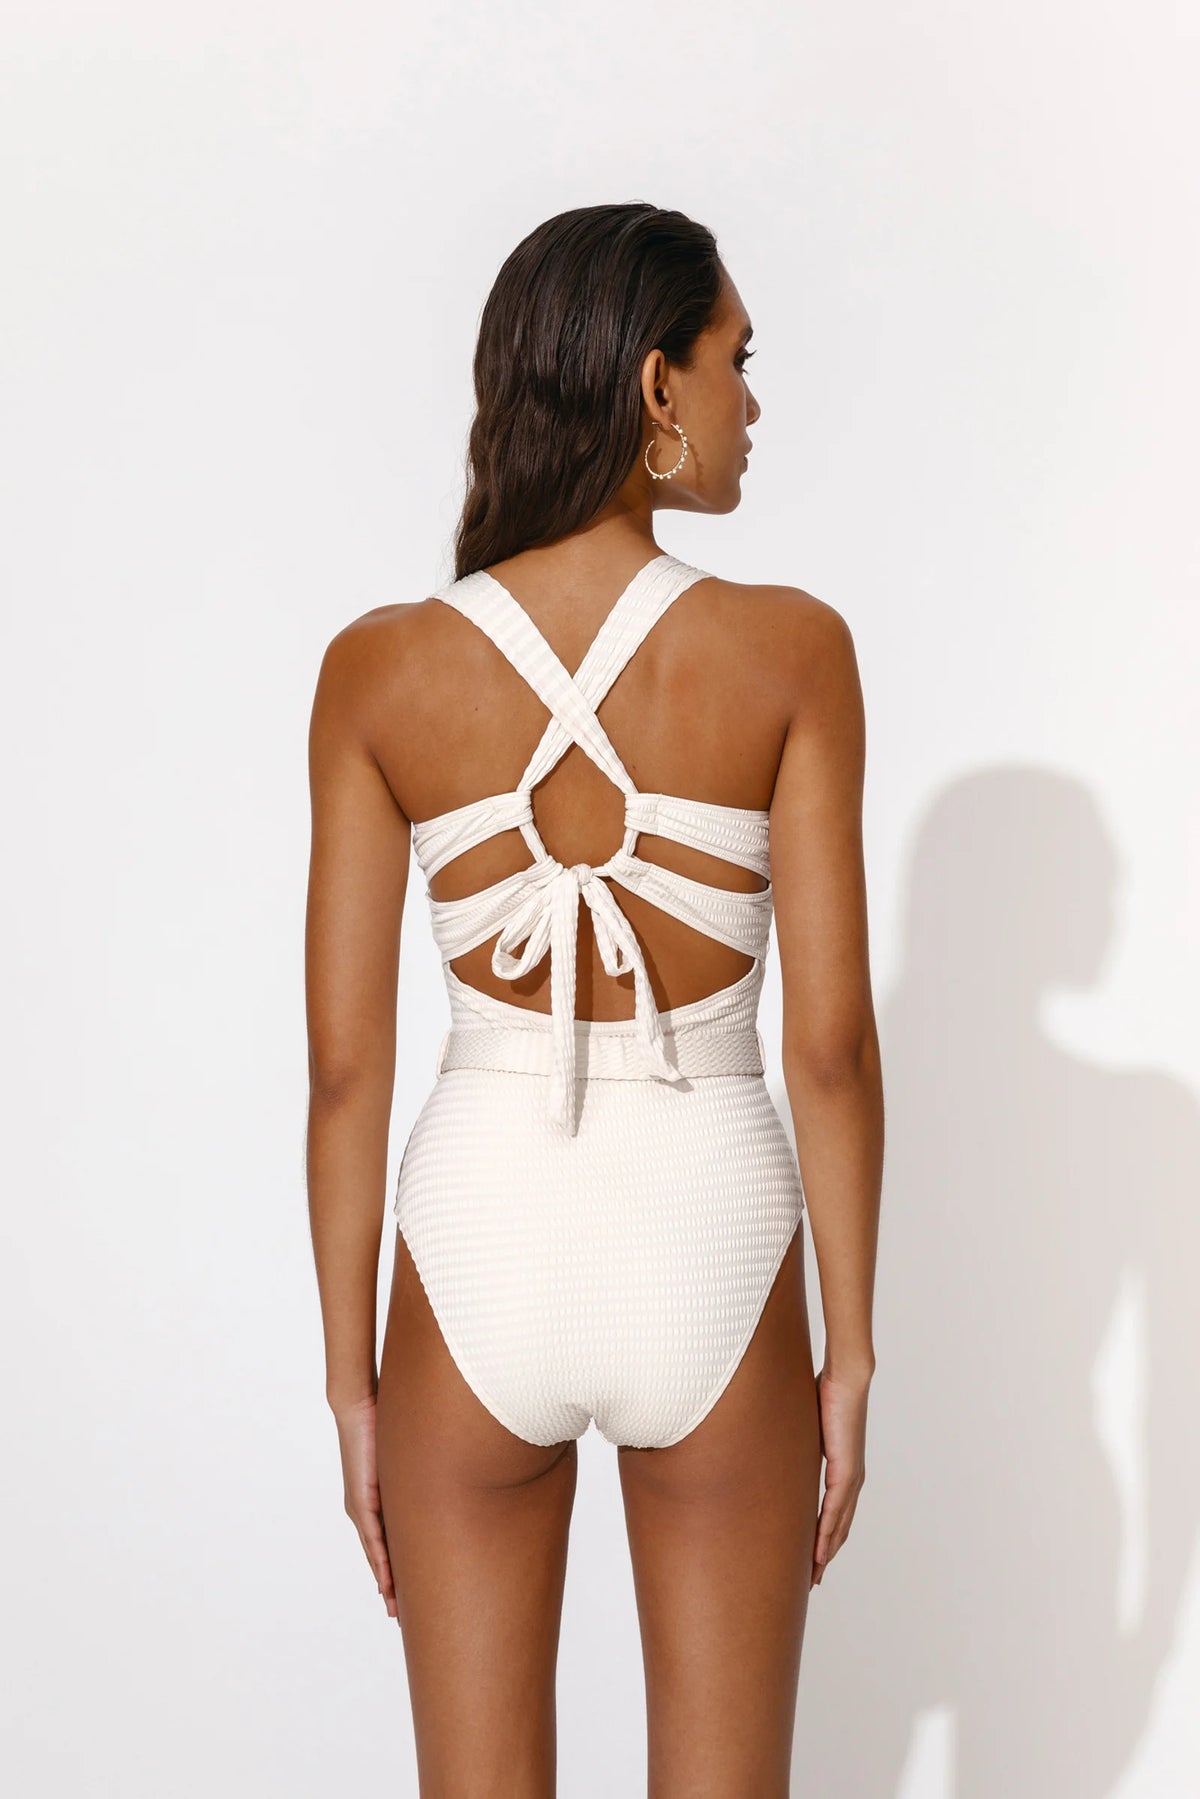 Off white swimsuit with moulded cups thick straps and attached belt with circular tortoise shell look buckle with tie strap details at the back